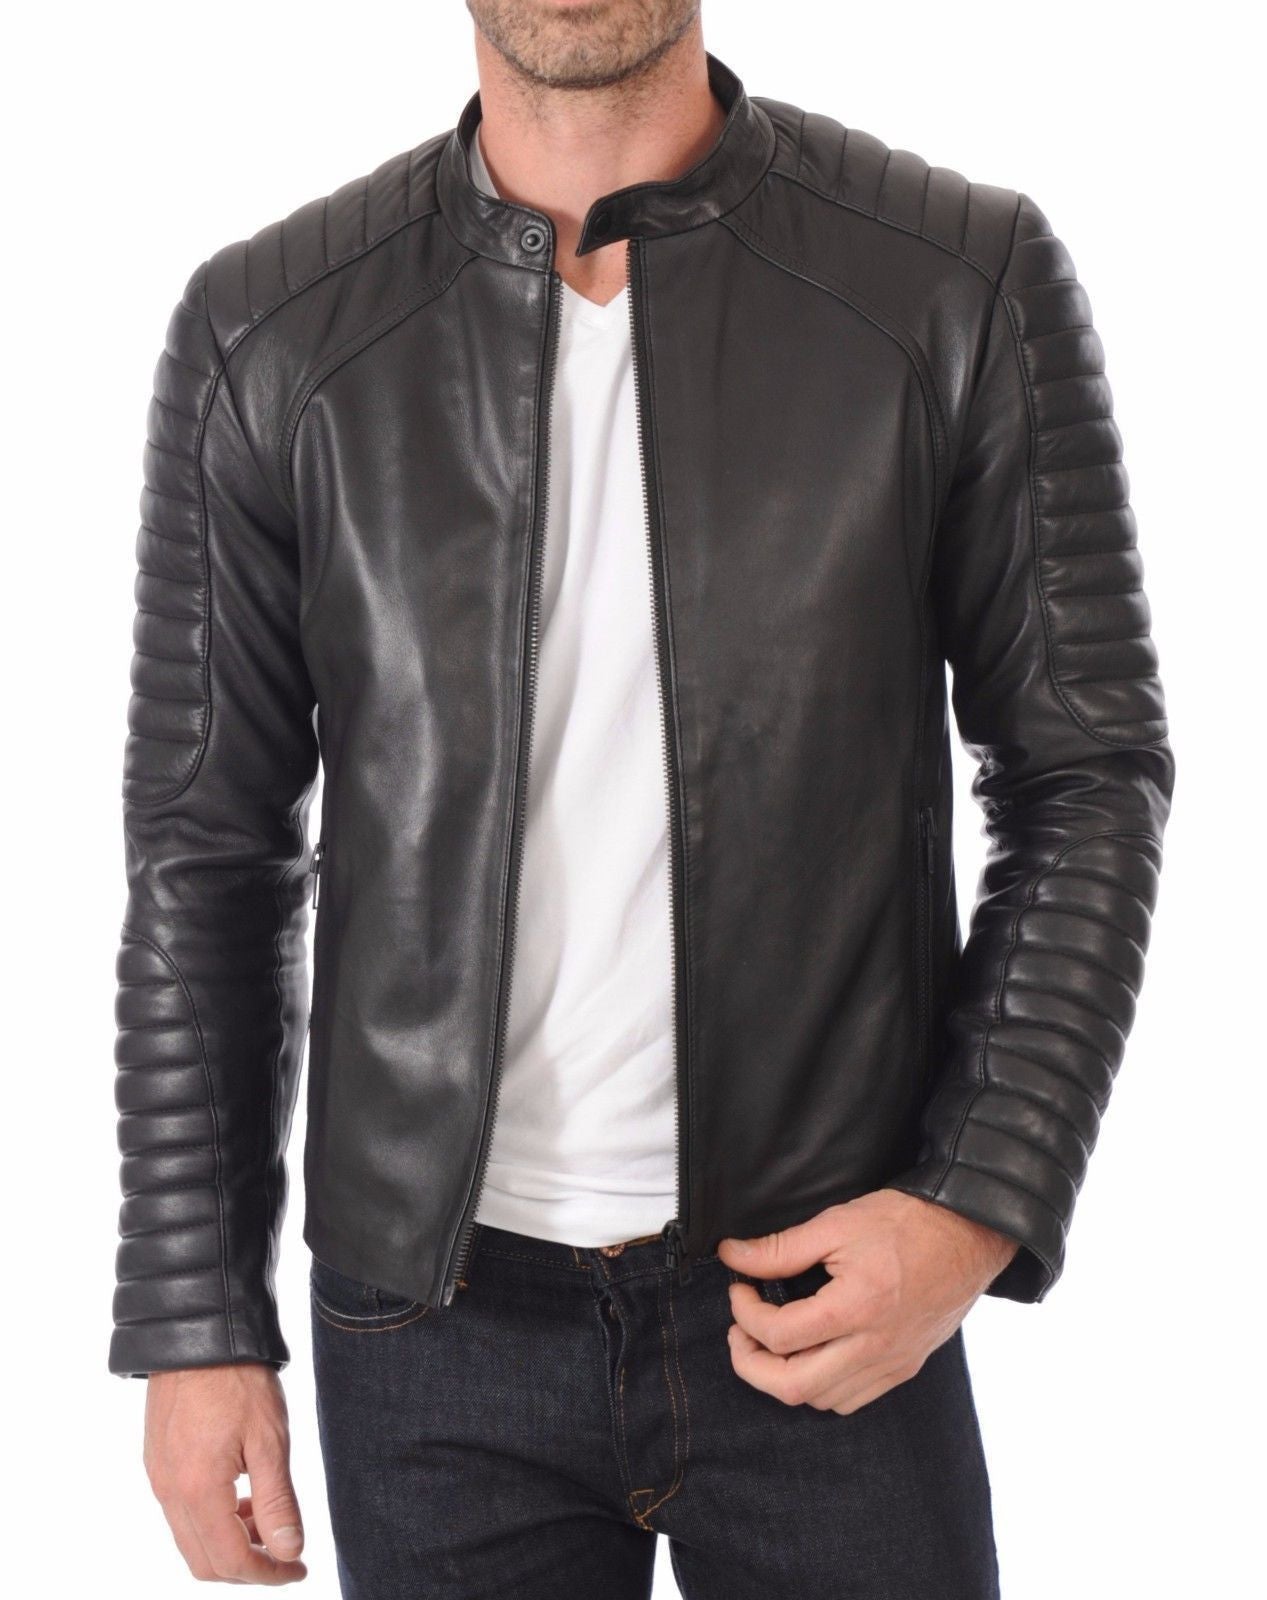 Men Club Black Real Leather Jacket – The Film Jackets